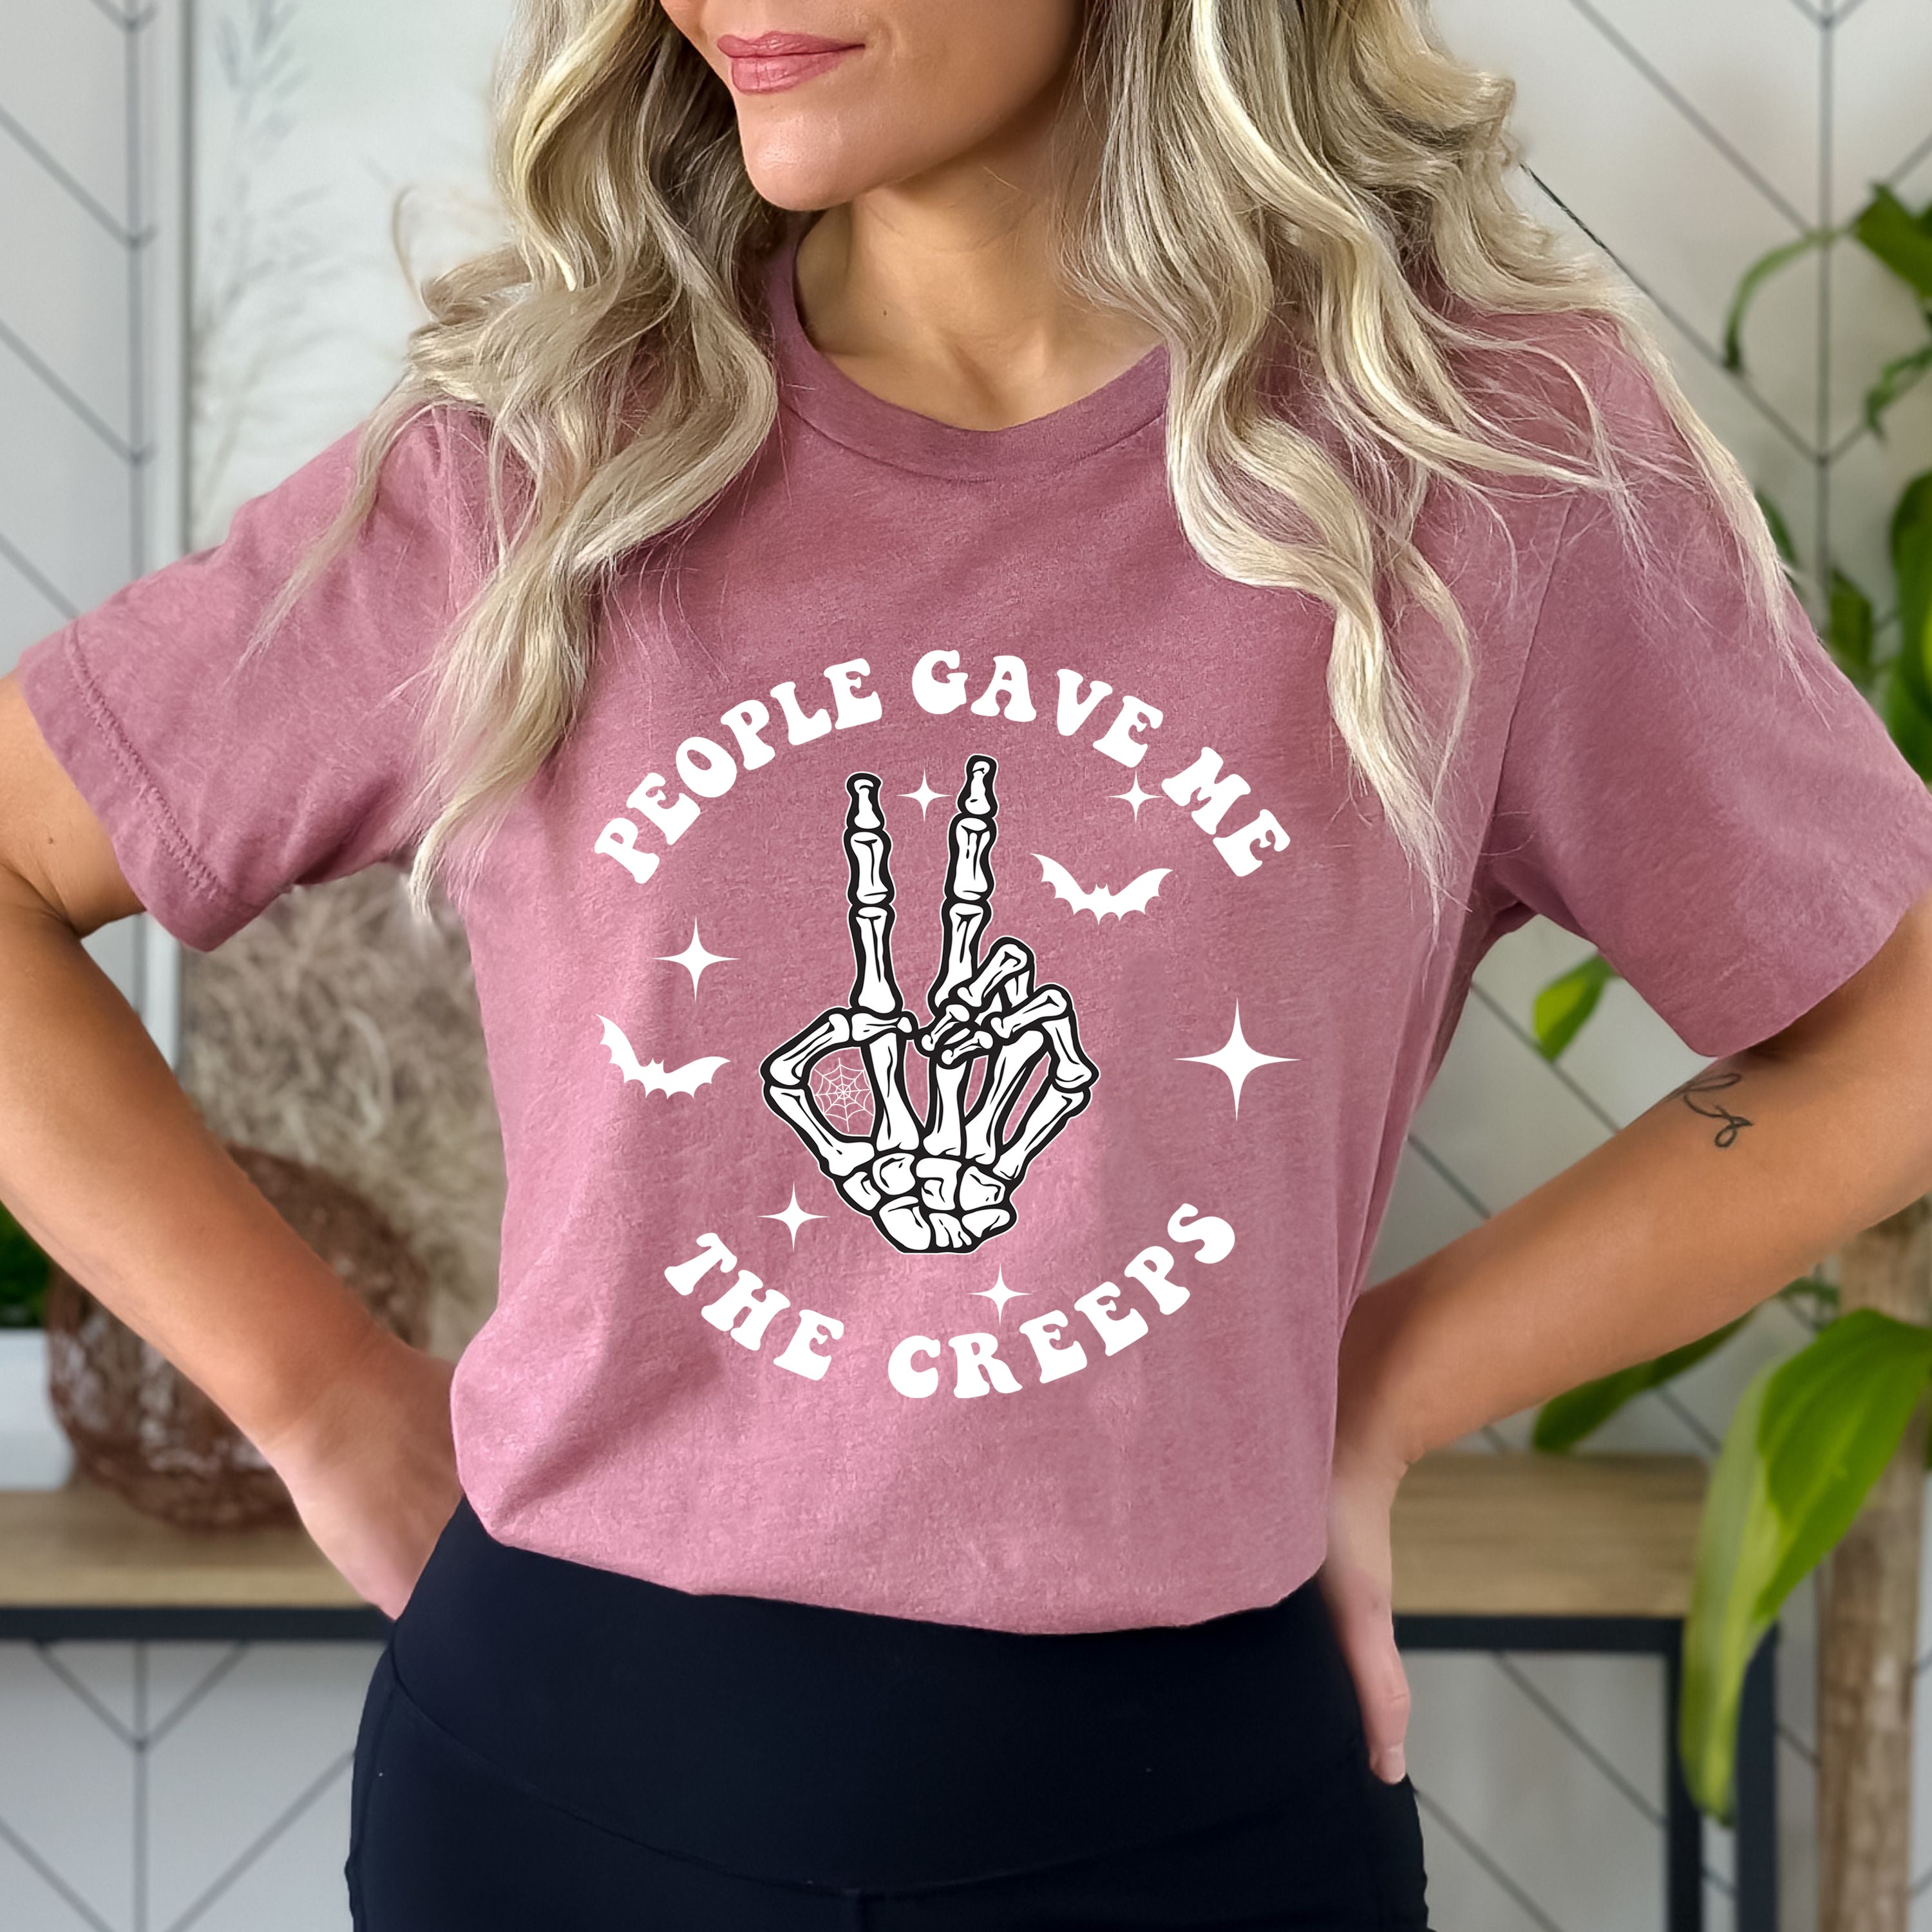 "People Gave Me The Creeps" - Bella Canvas T-Shirt